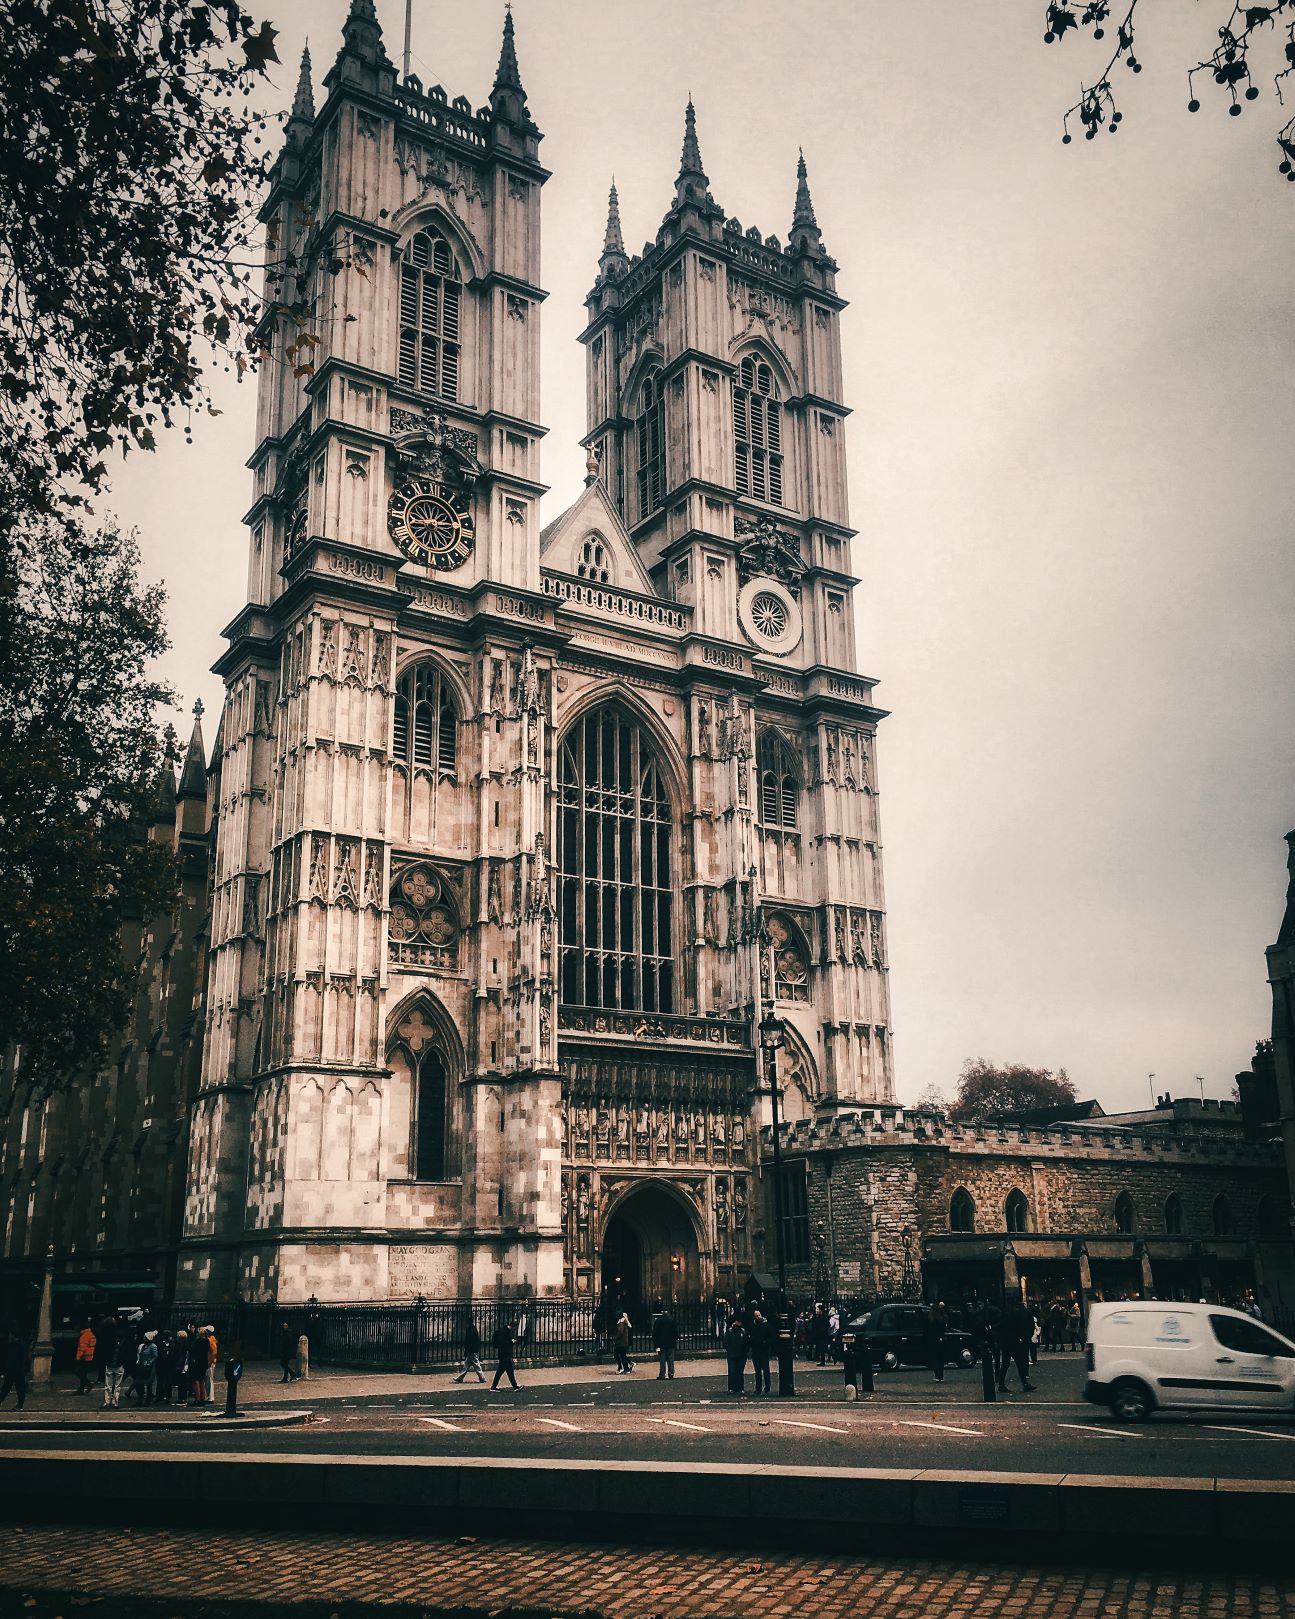 The British Parliament is located in Westminster. It is also right next to Westminster Abbey and the iconic Big Ben.